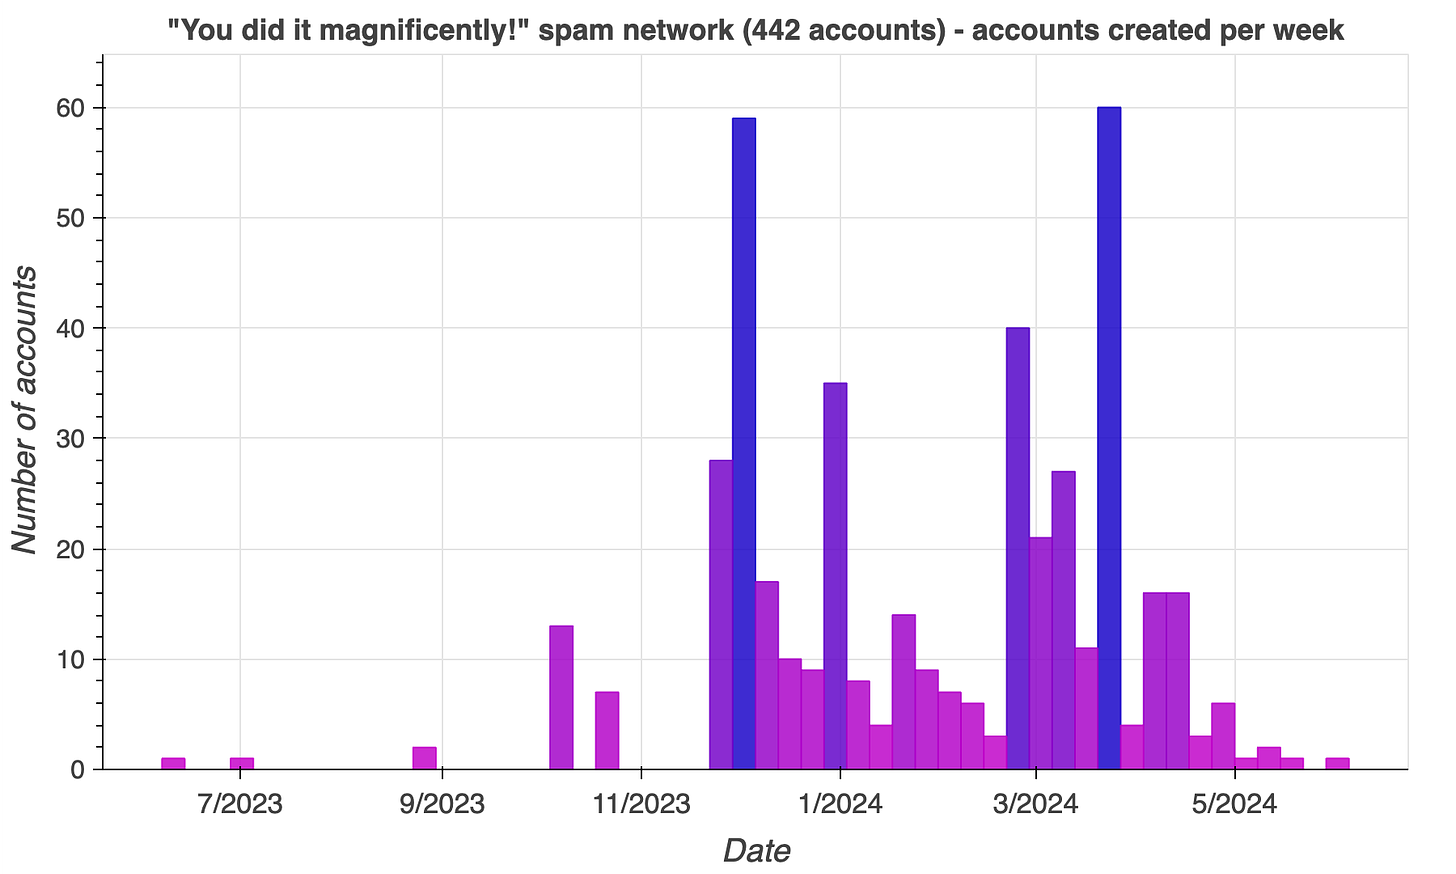 weekly account creation volume bar chart for the 442 accounts in the network